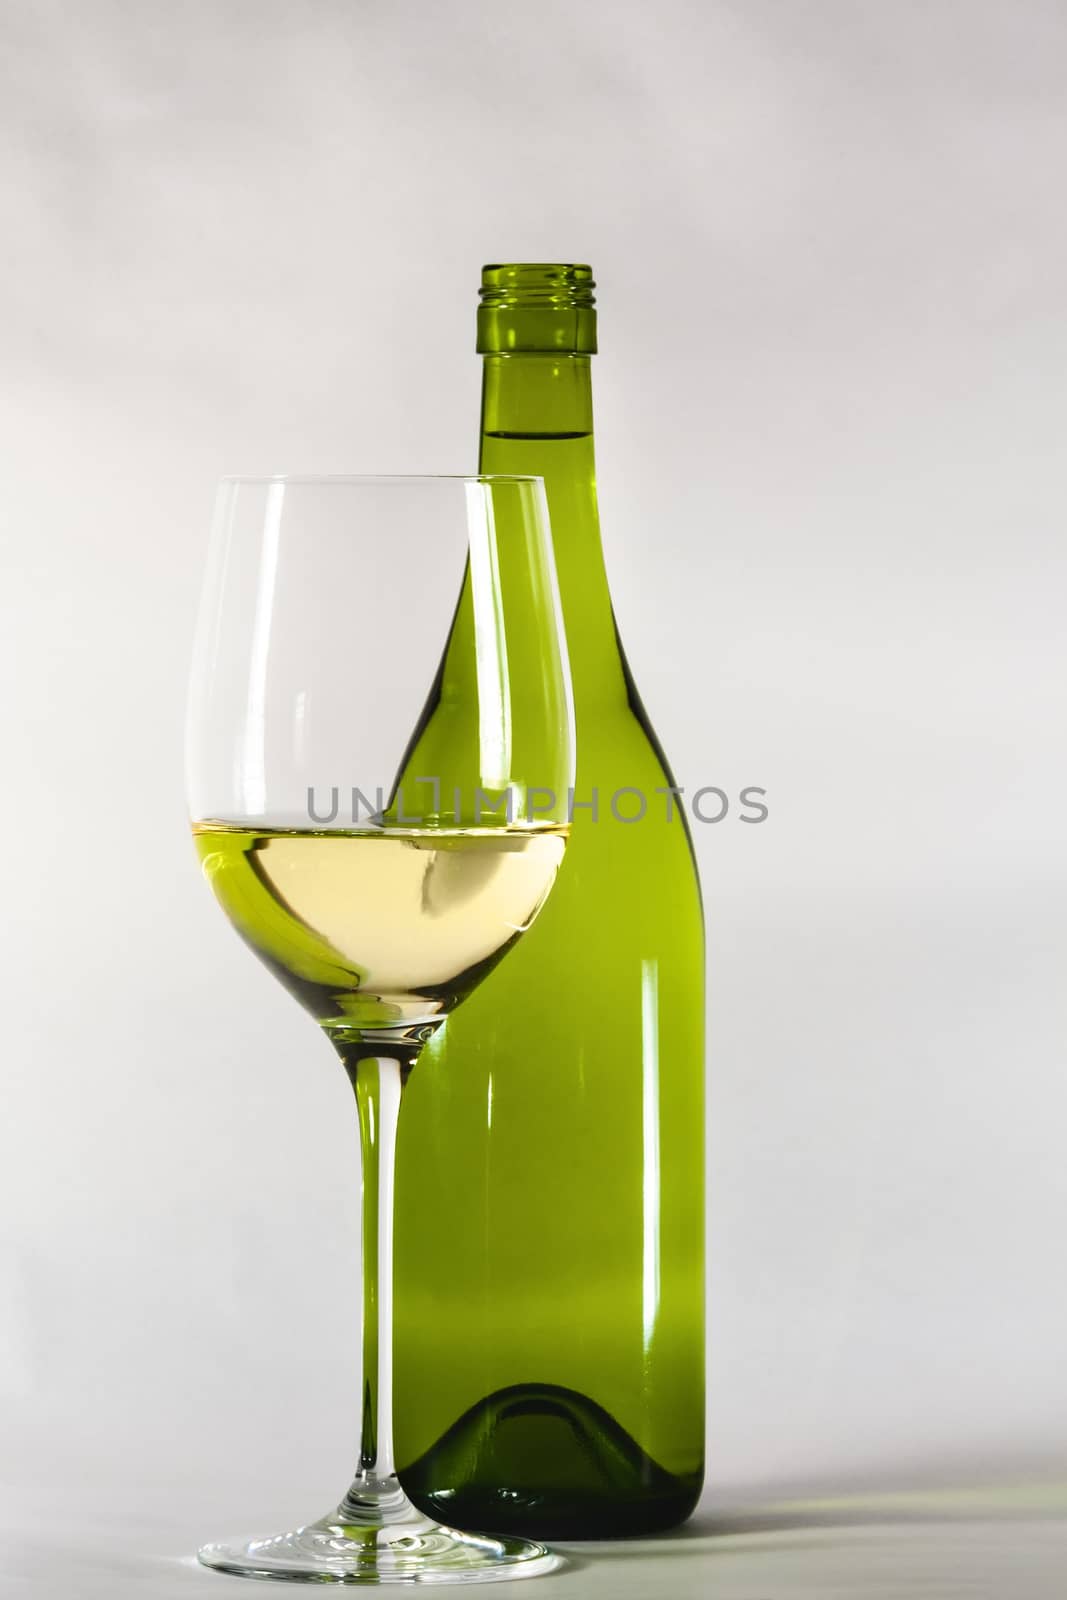 A vintage white wine bottle with a glass